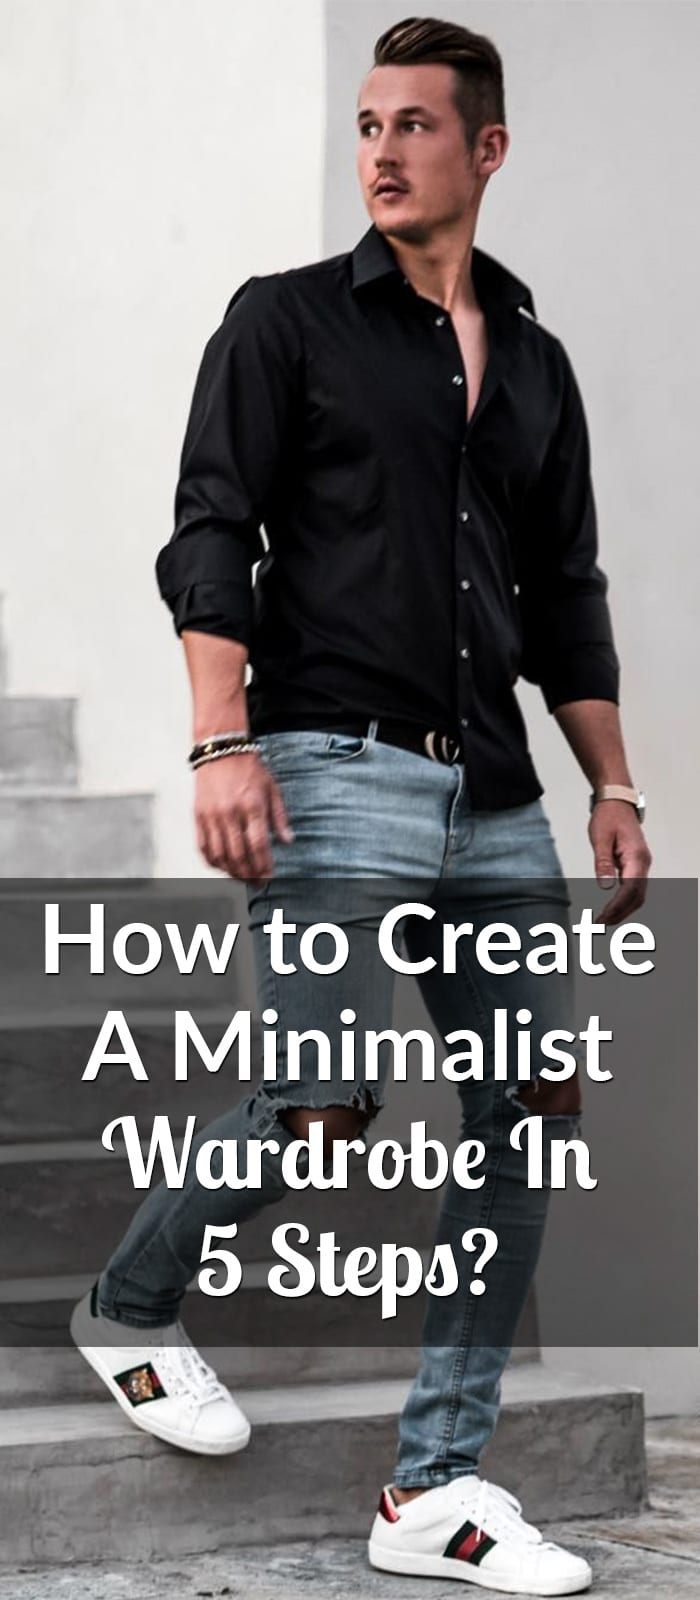 How to Create a Minimalist Wardrobe In 5 Steps